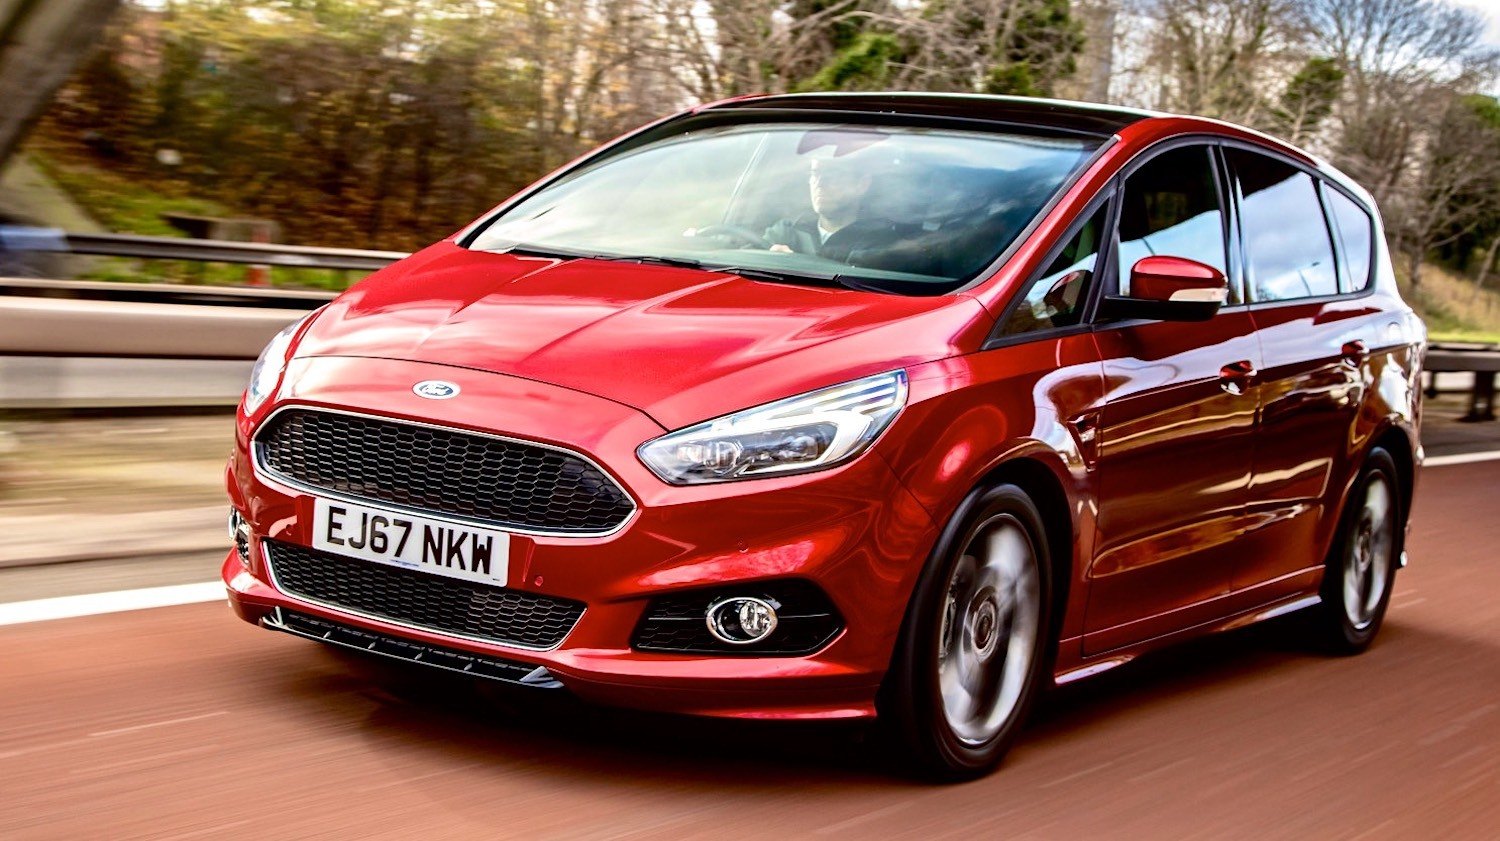 https://www.drive.co.uk/wp-content/uploads/2018/05/Neil-Lyndon-reviews-the-Ford-S-Max-for-Drive-10.jpg